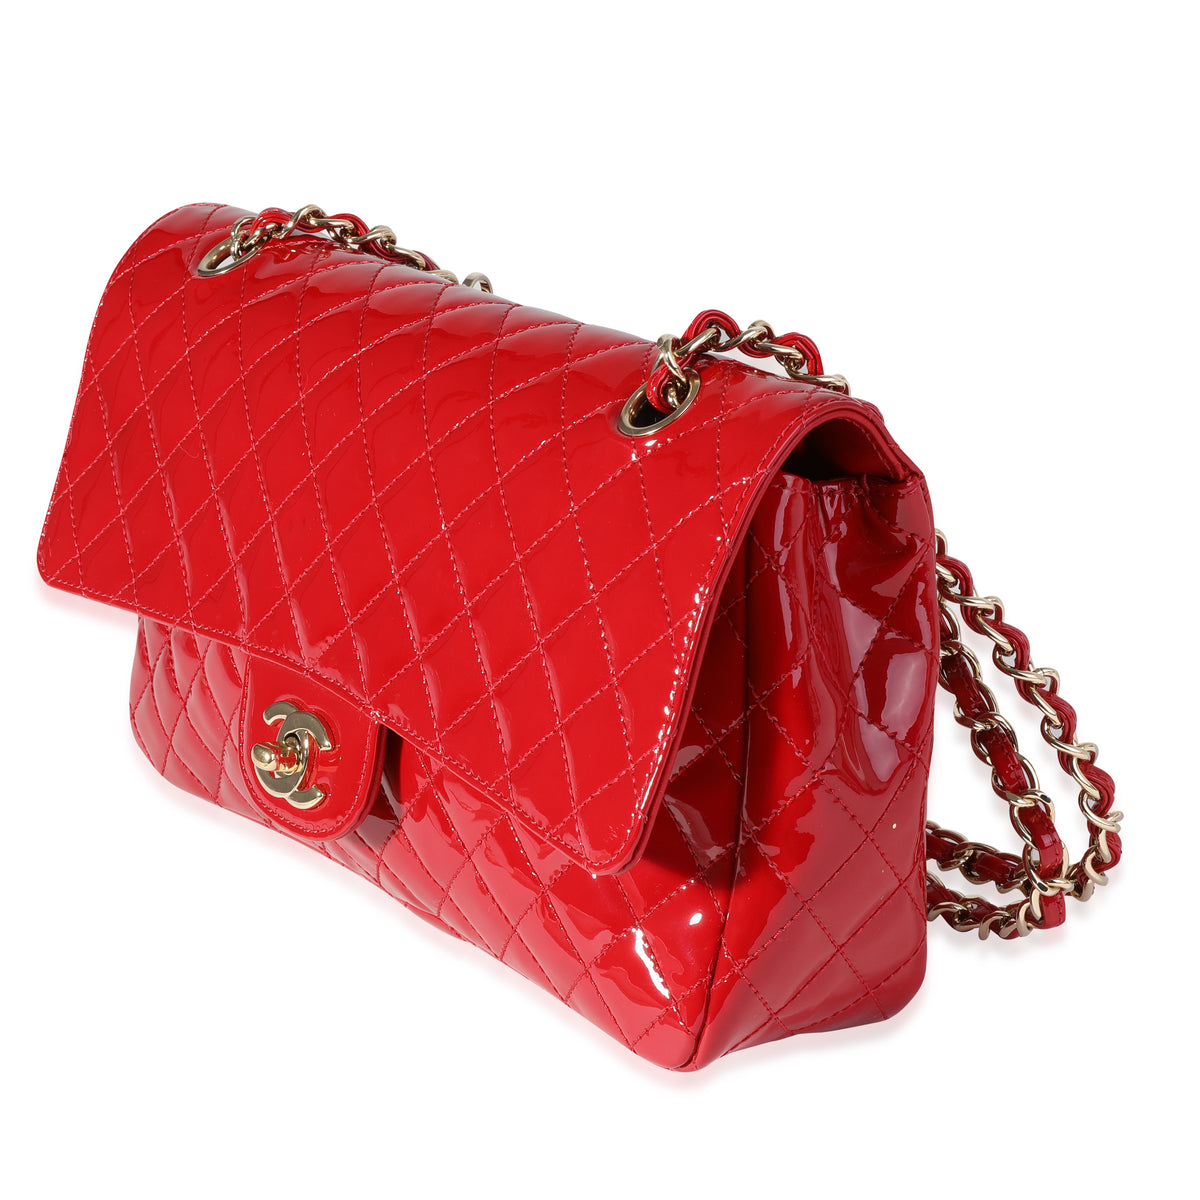 Chanel Red Quilted Patent Leather Valentine's Day Medium Single